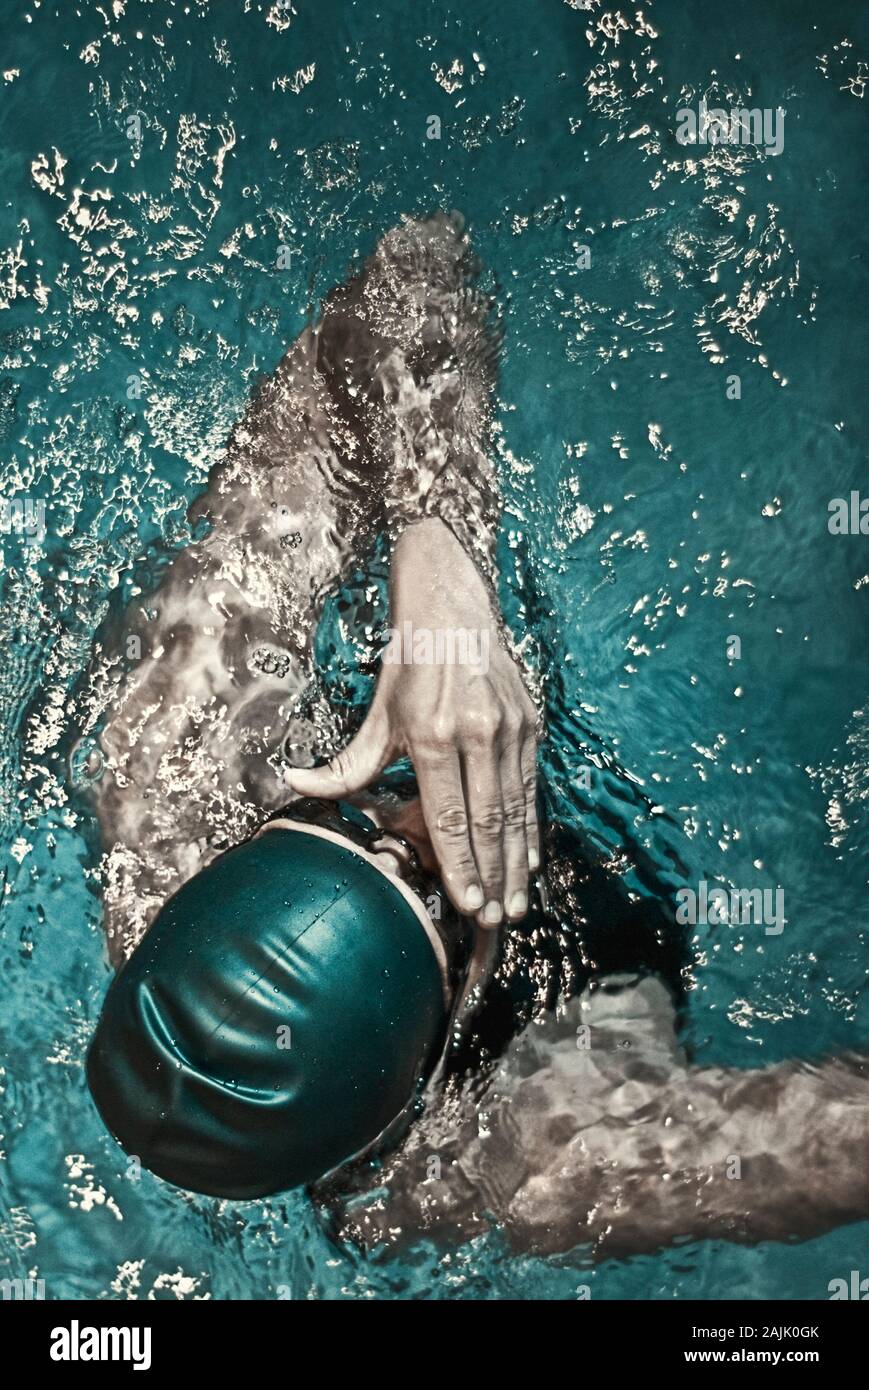 female swimmer with cap in pool Stock Photo